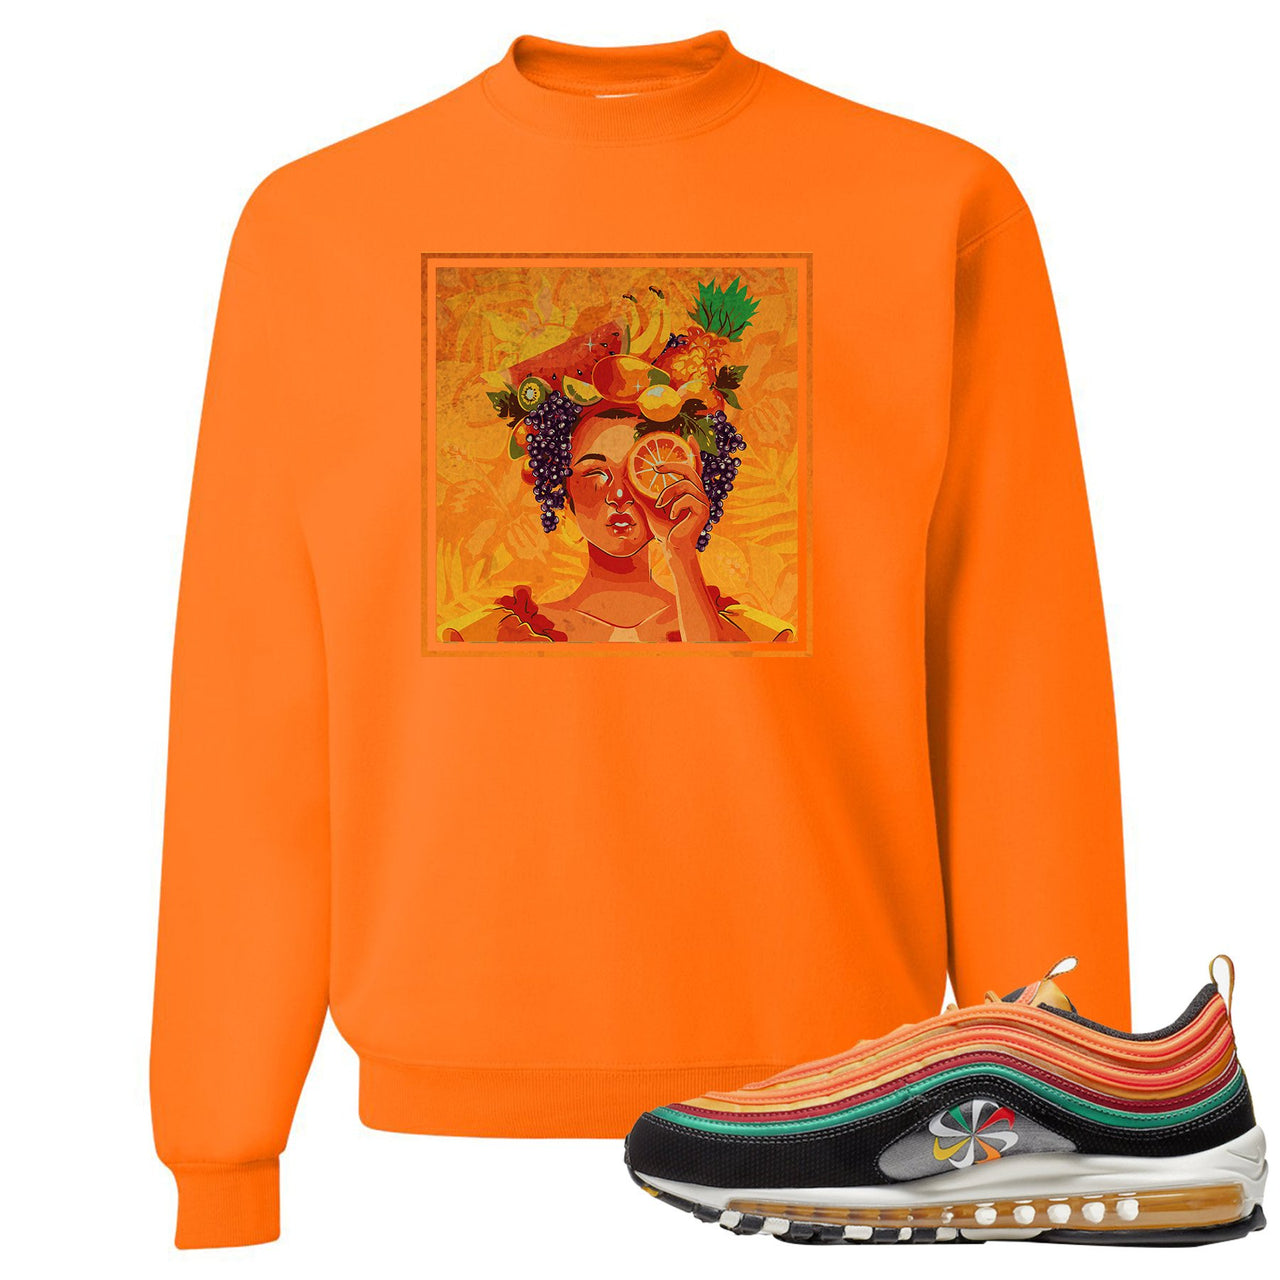 Printed on the front of the Air Max 97 Sunburst safety orange crewneck sweatshirt is the Lady Fruit logo